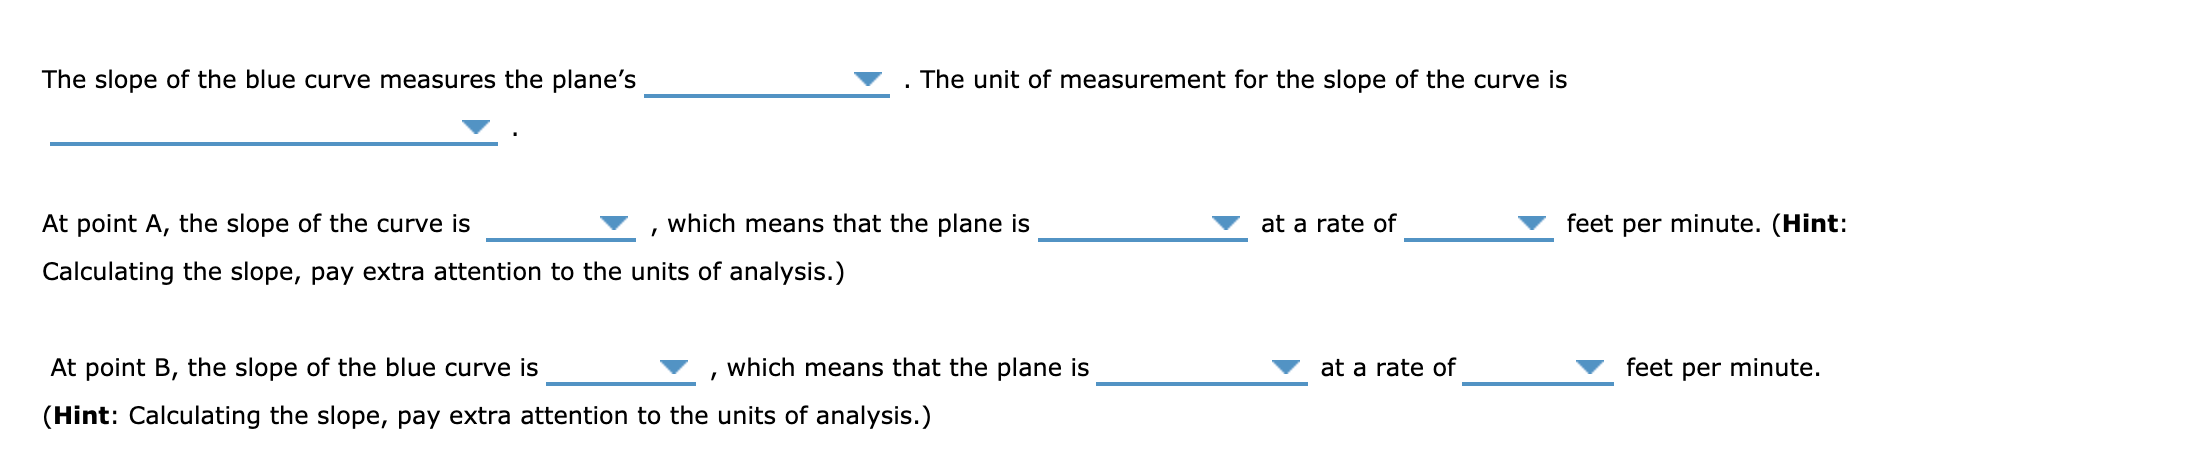 The slope of the blue curve measures the plane's
The unit of measurement for the slope of the curve is
At point A, the slope of the curve is
which means that the plane is
at a rate of
feet per minute. (Hint:
Calculating the slope, pay extra attention to the units of analysis.)
At point B, the slope of the blue curve is
which means that the plane is
at a rate of
feet per minute.
(Hint: Calculating the slope, pay extra attention to the units of analysis.)
